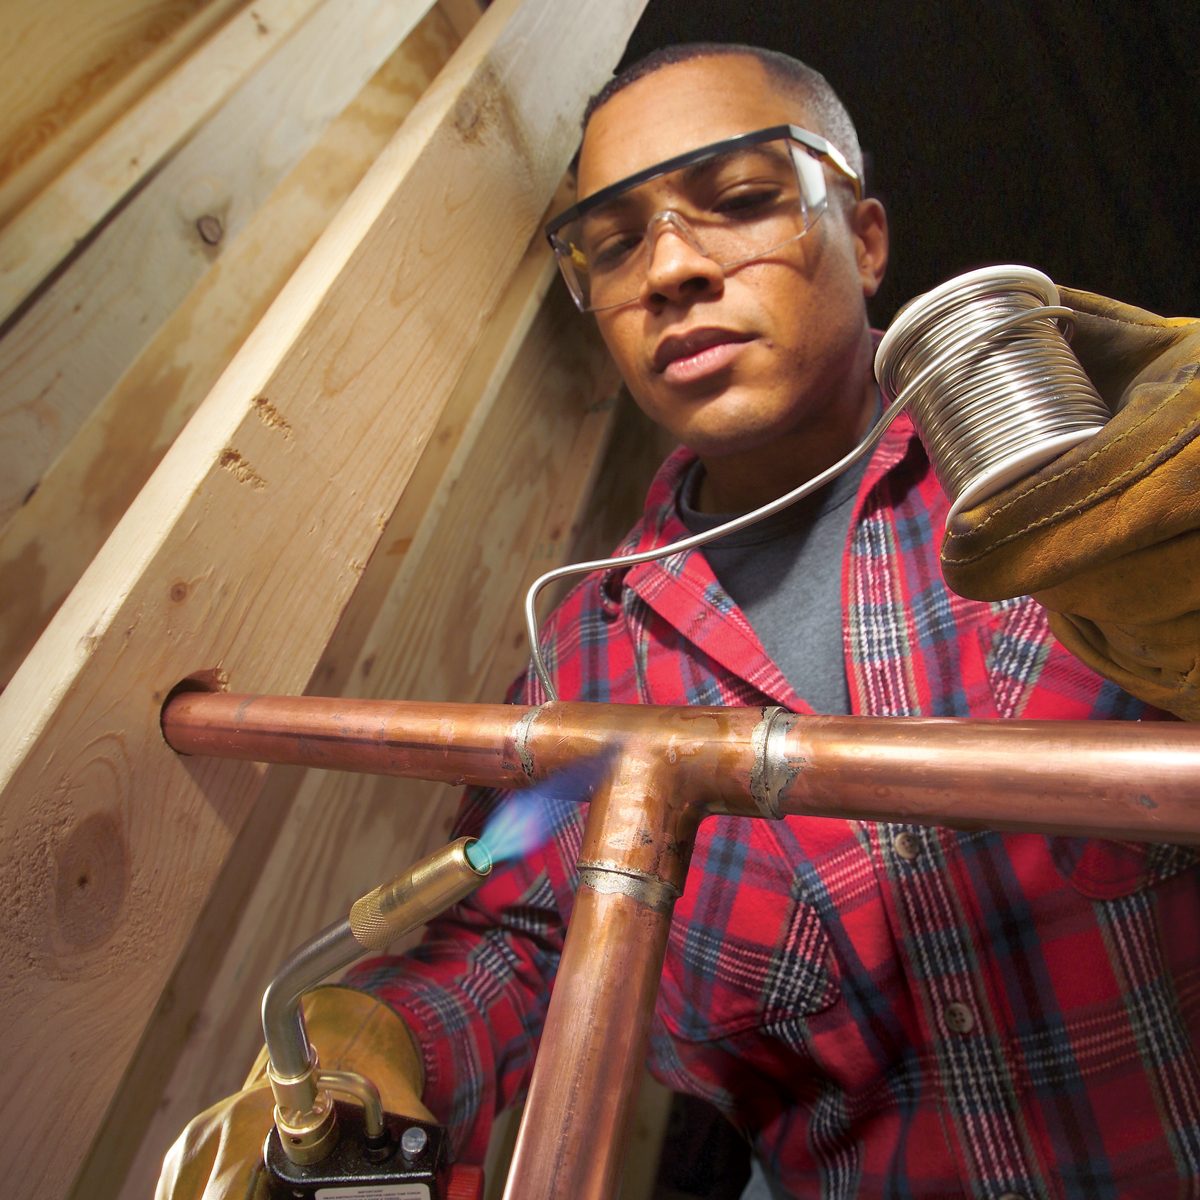 A man using a torch for welding a copper pipe